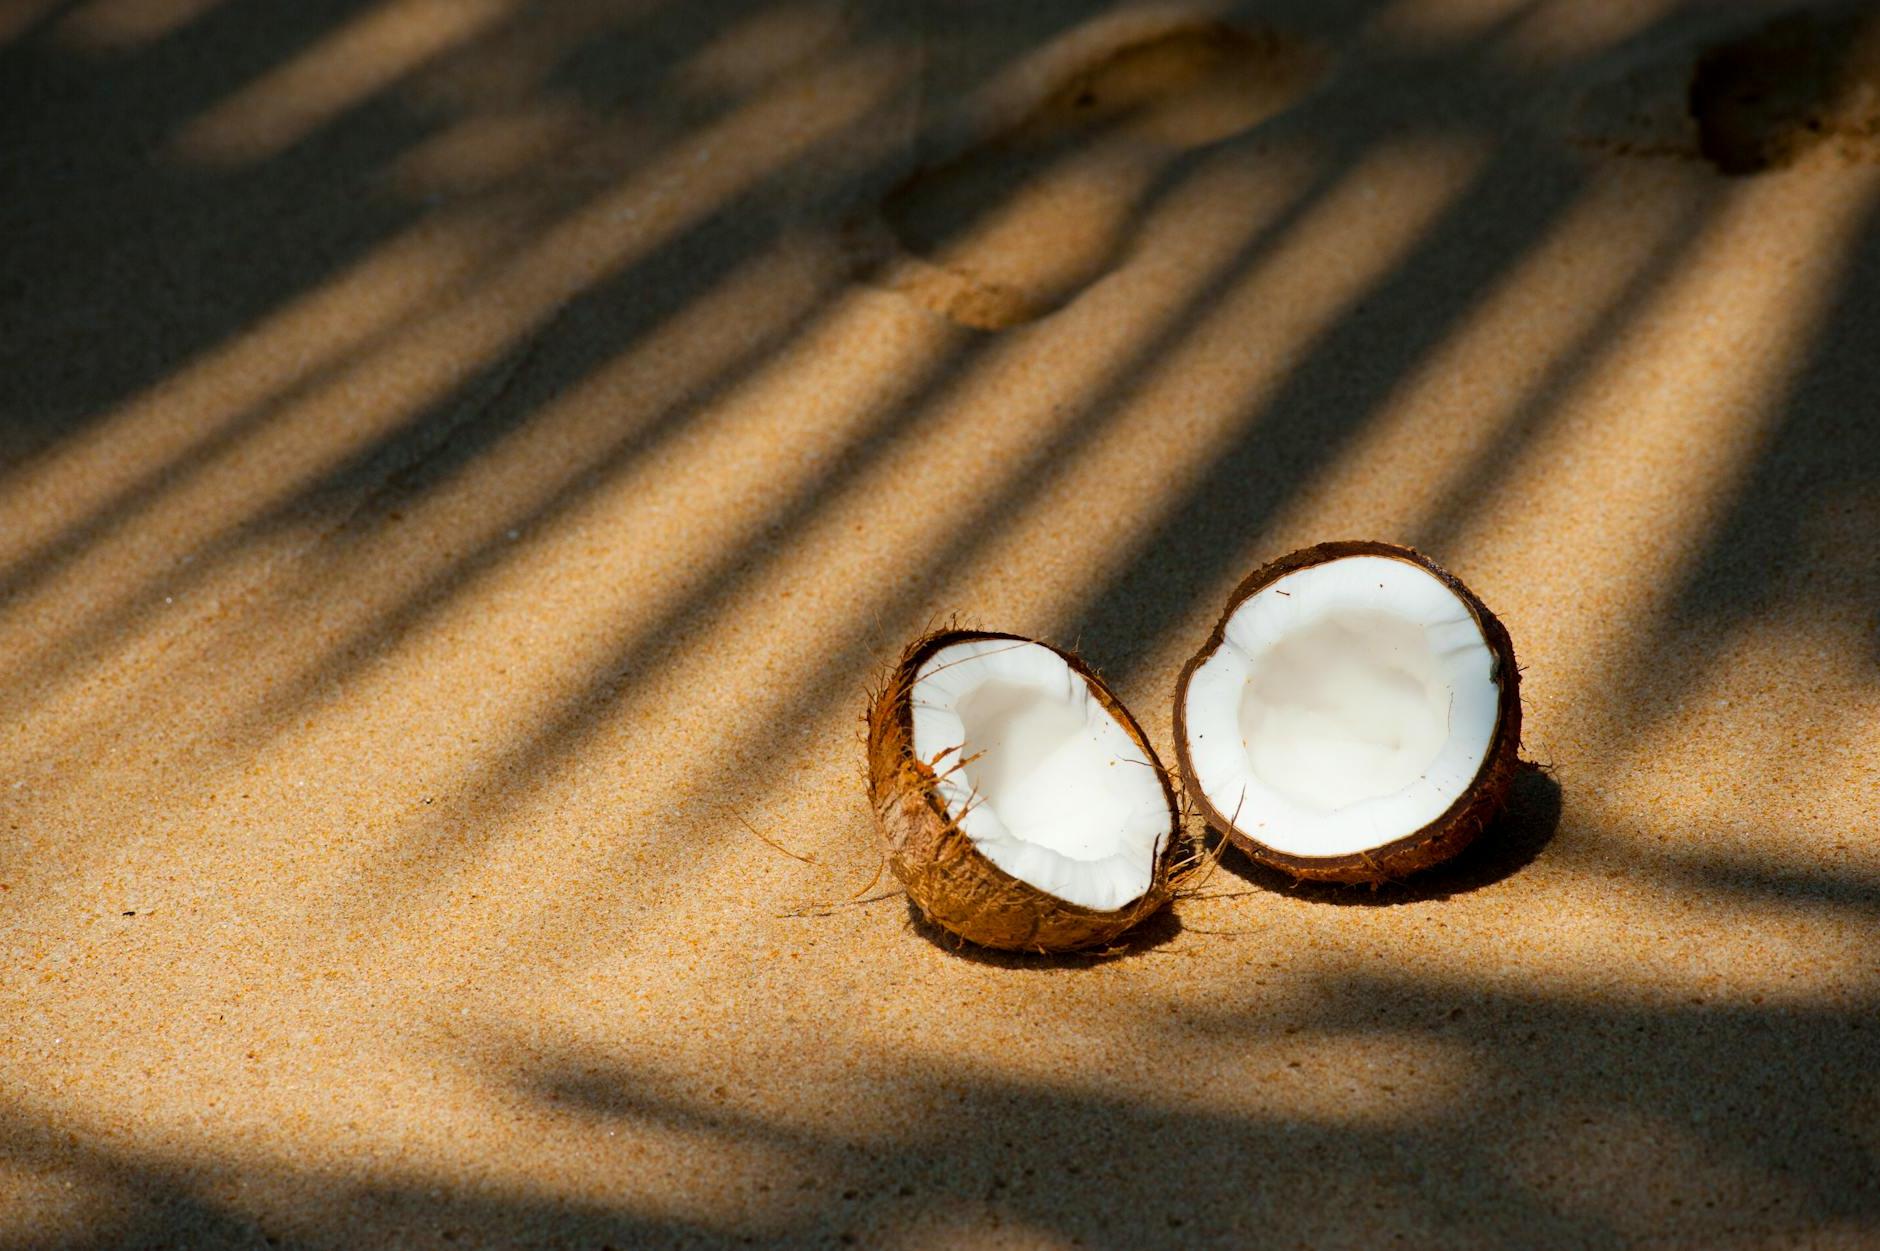 Opened Coconut on Sands